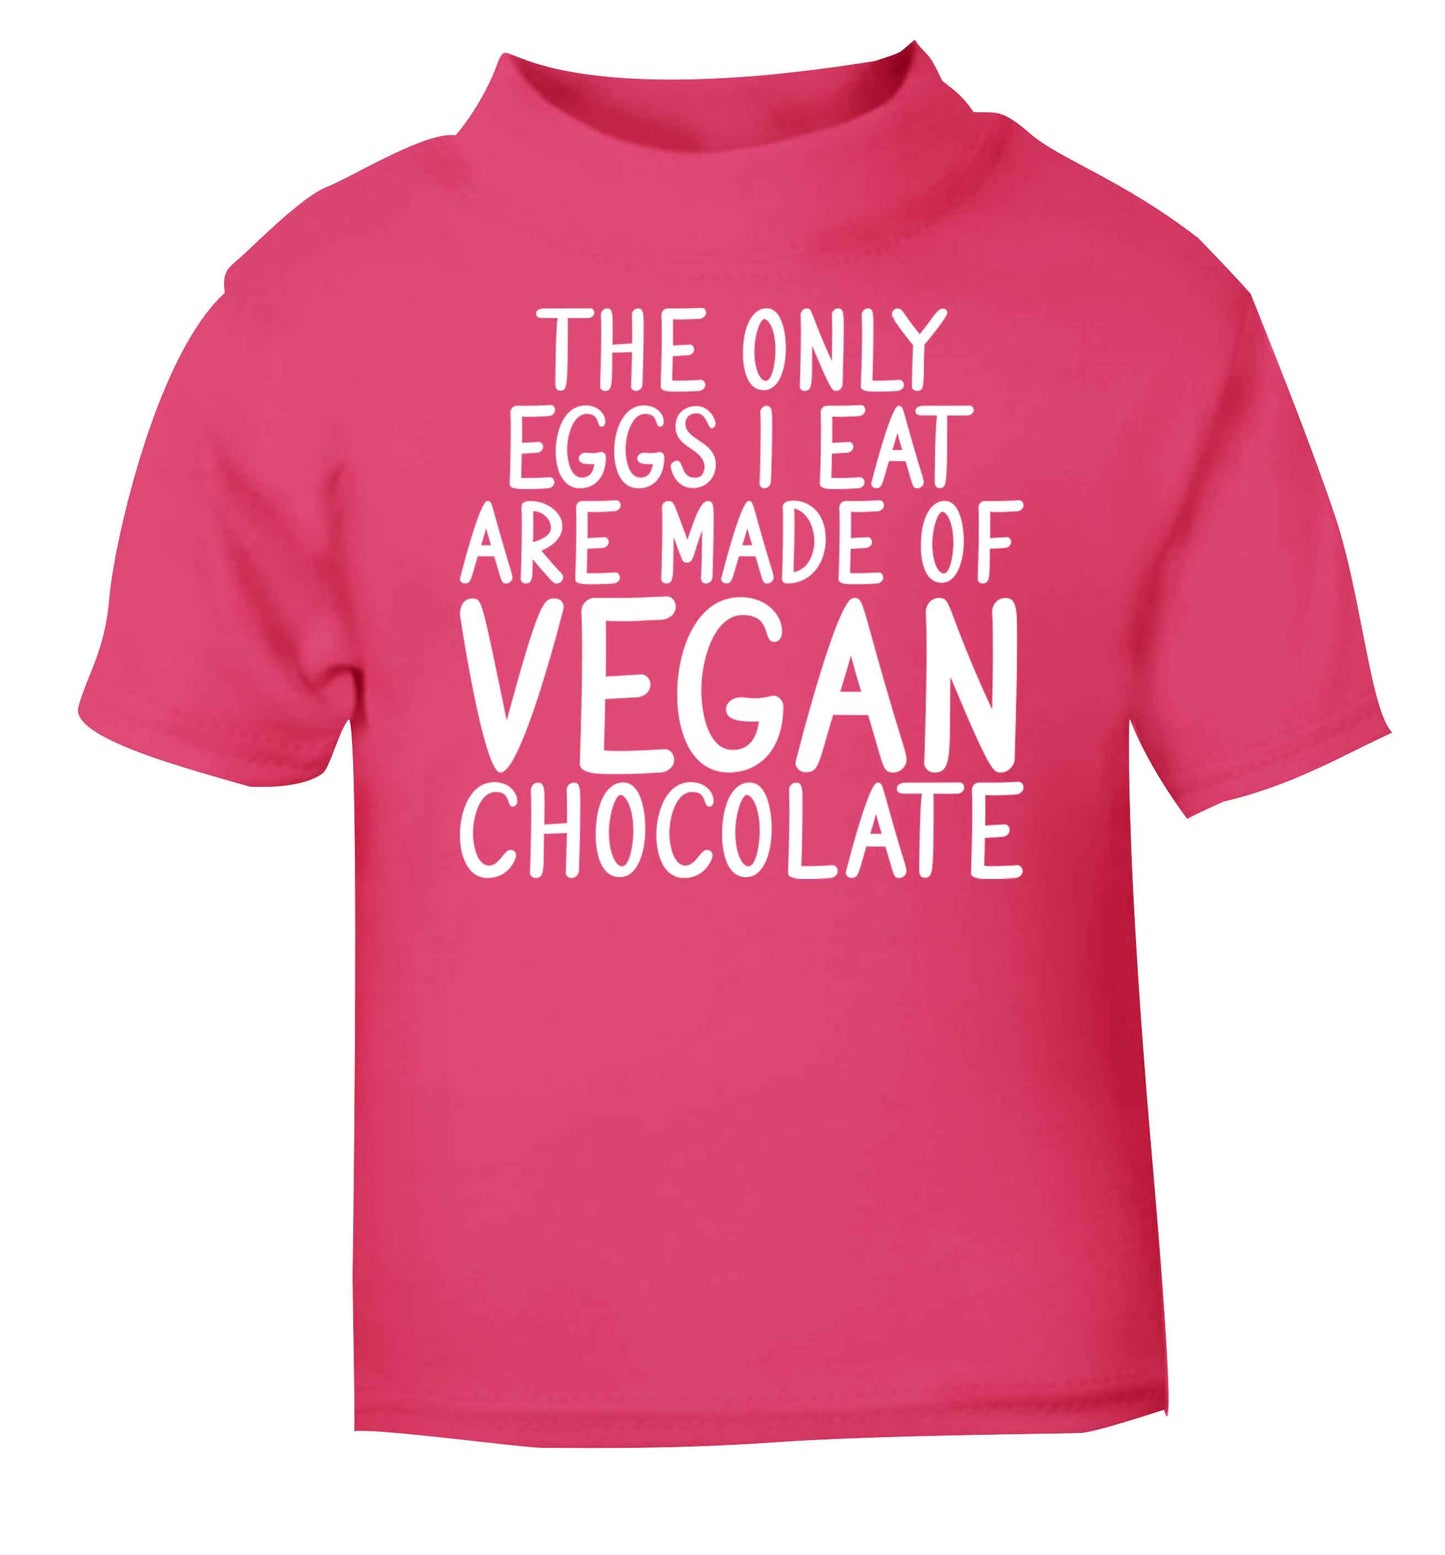 The only eggs I eat are made of vegan chocolate pink baby toddler Tshirt 2 Years